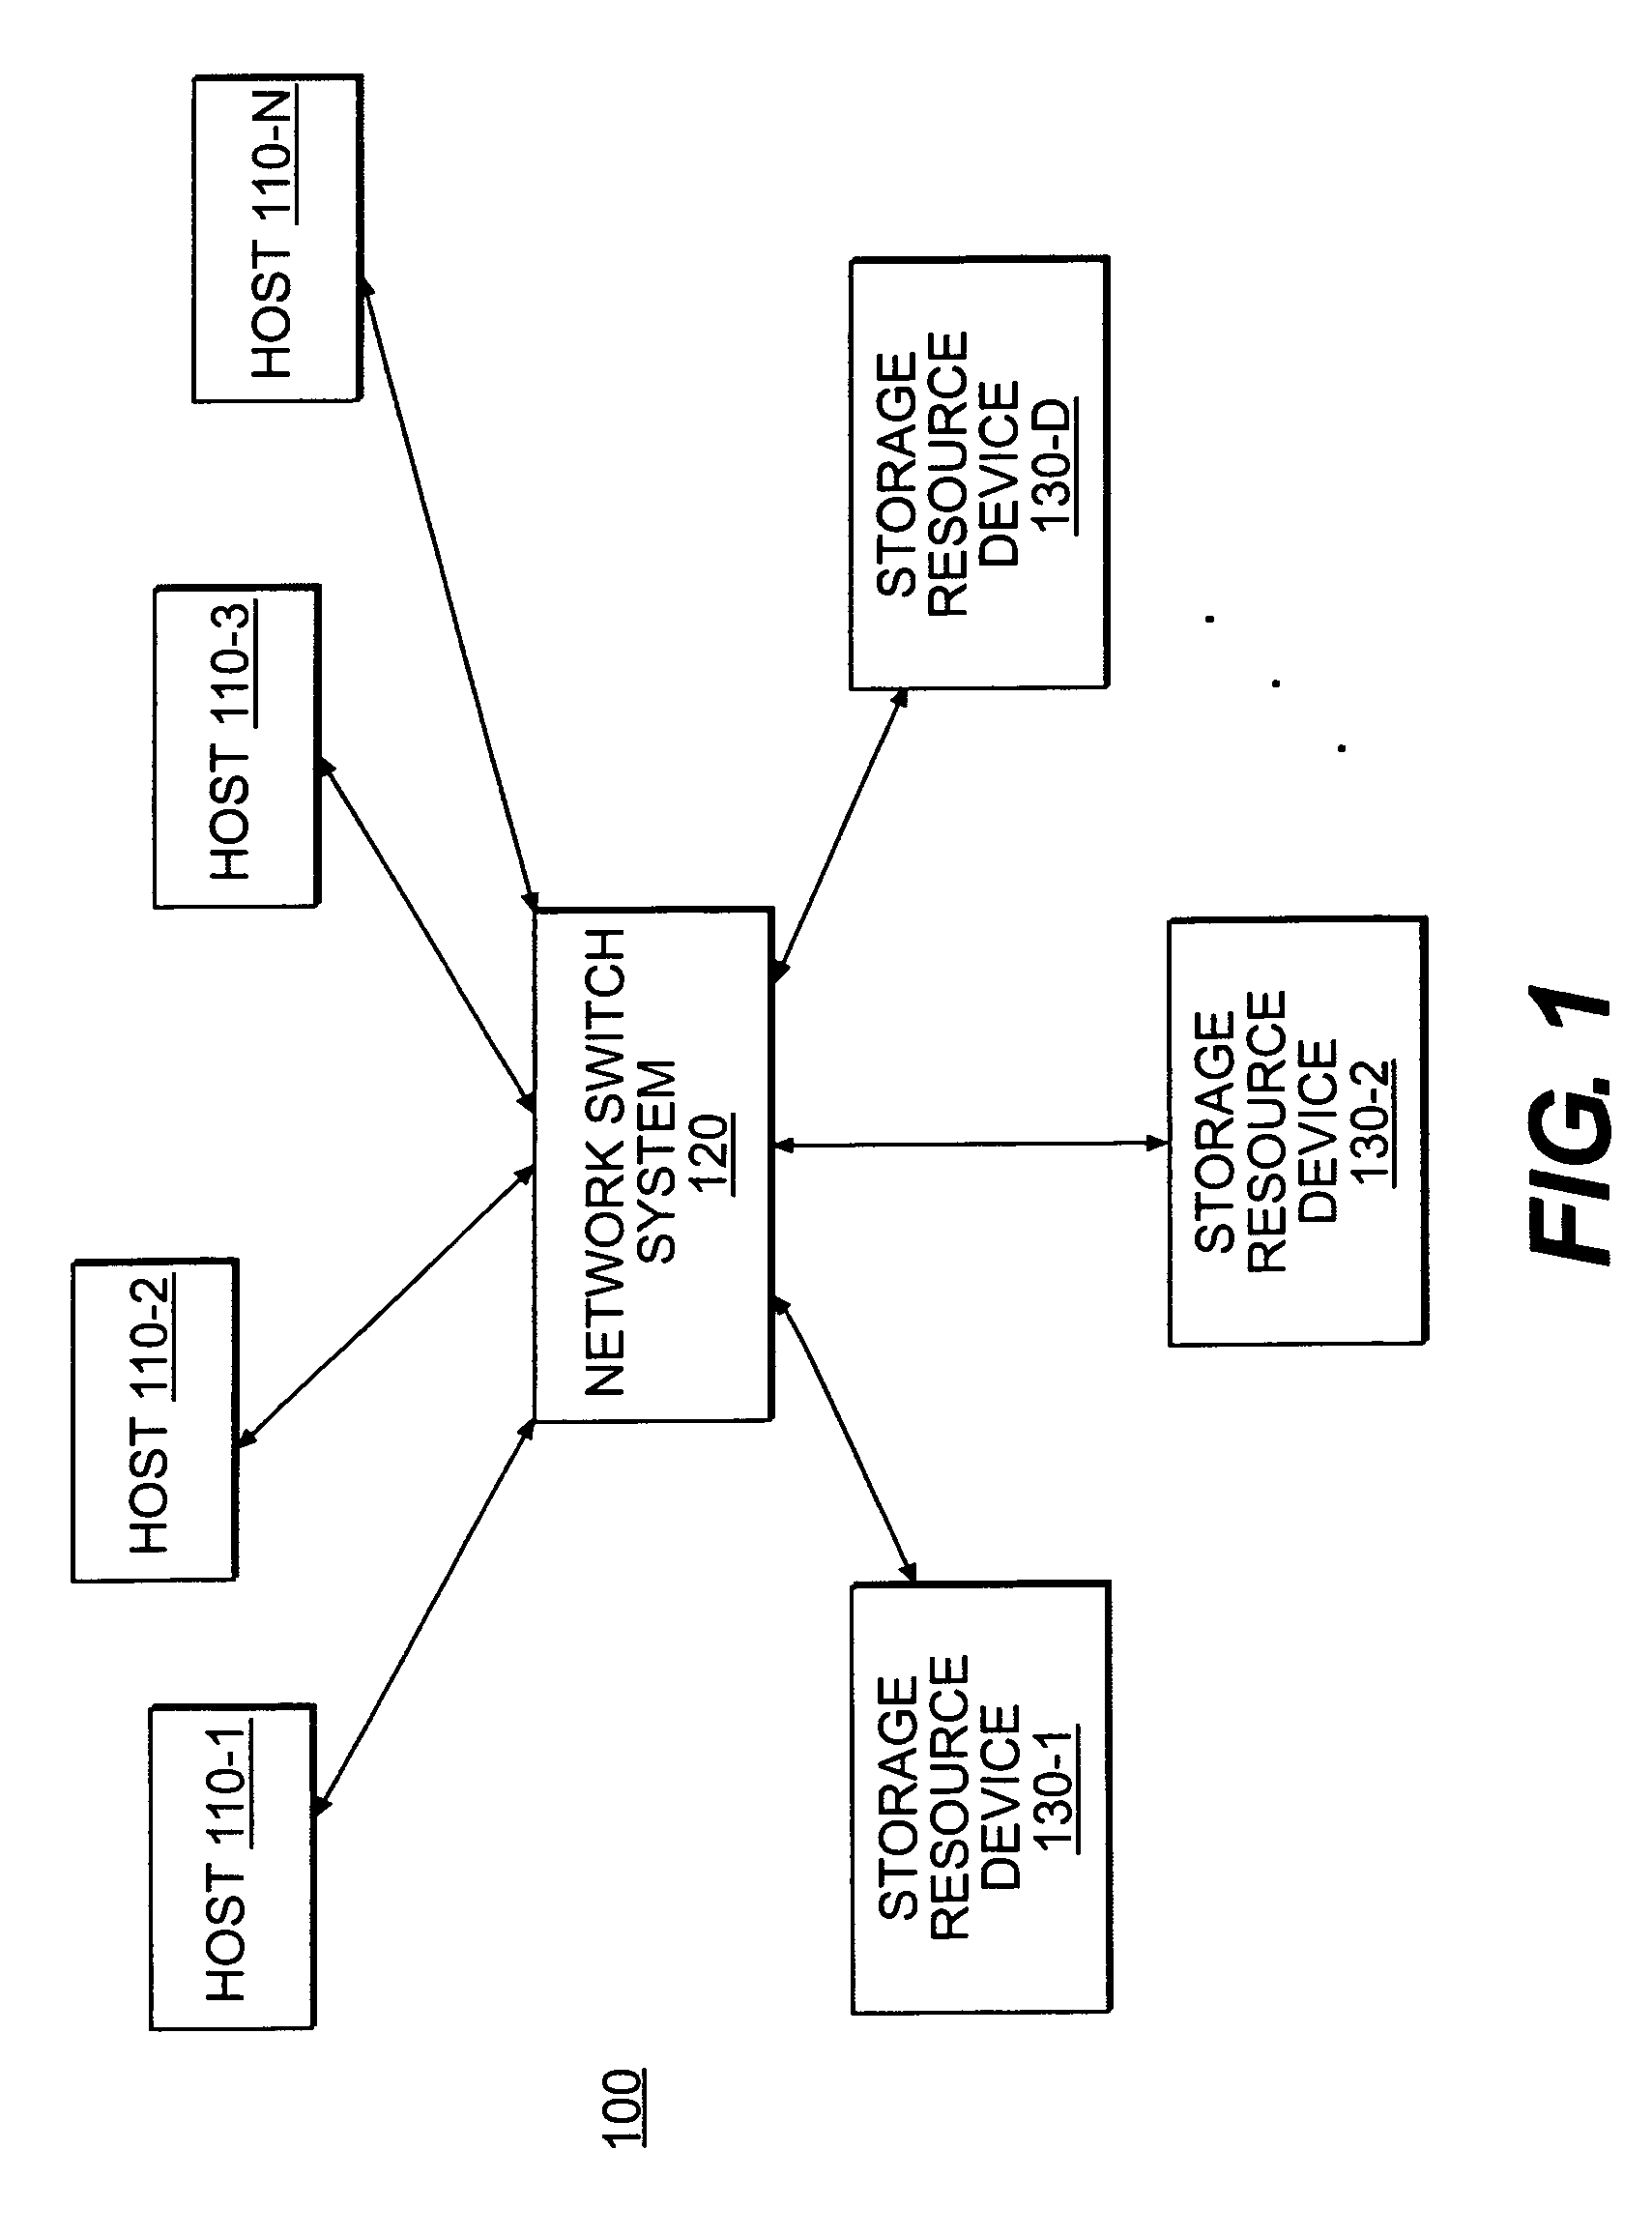 Systems and methods for configuring a storage virtualization environment